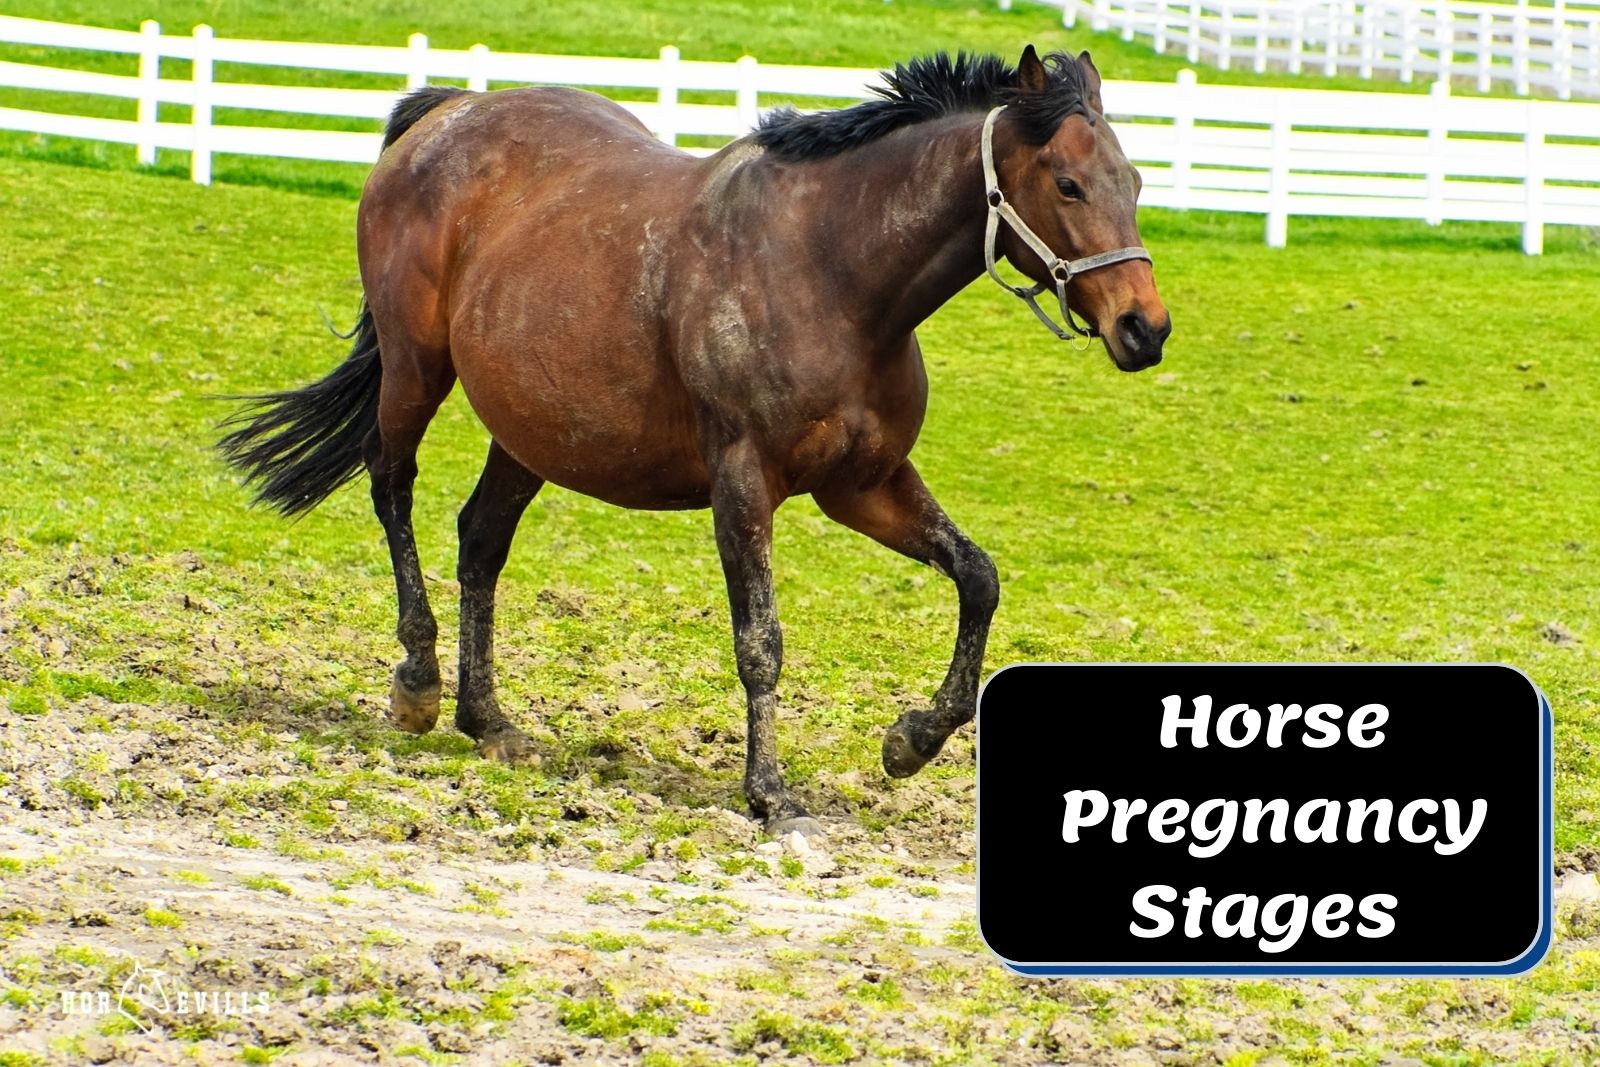 A pregnant horse running in mud